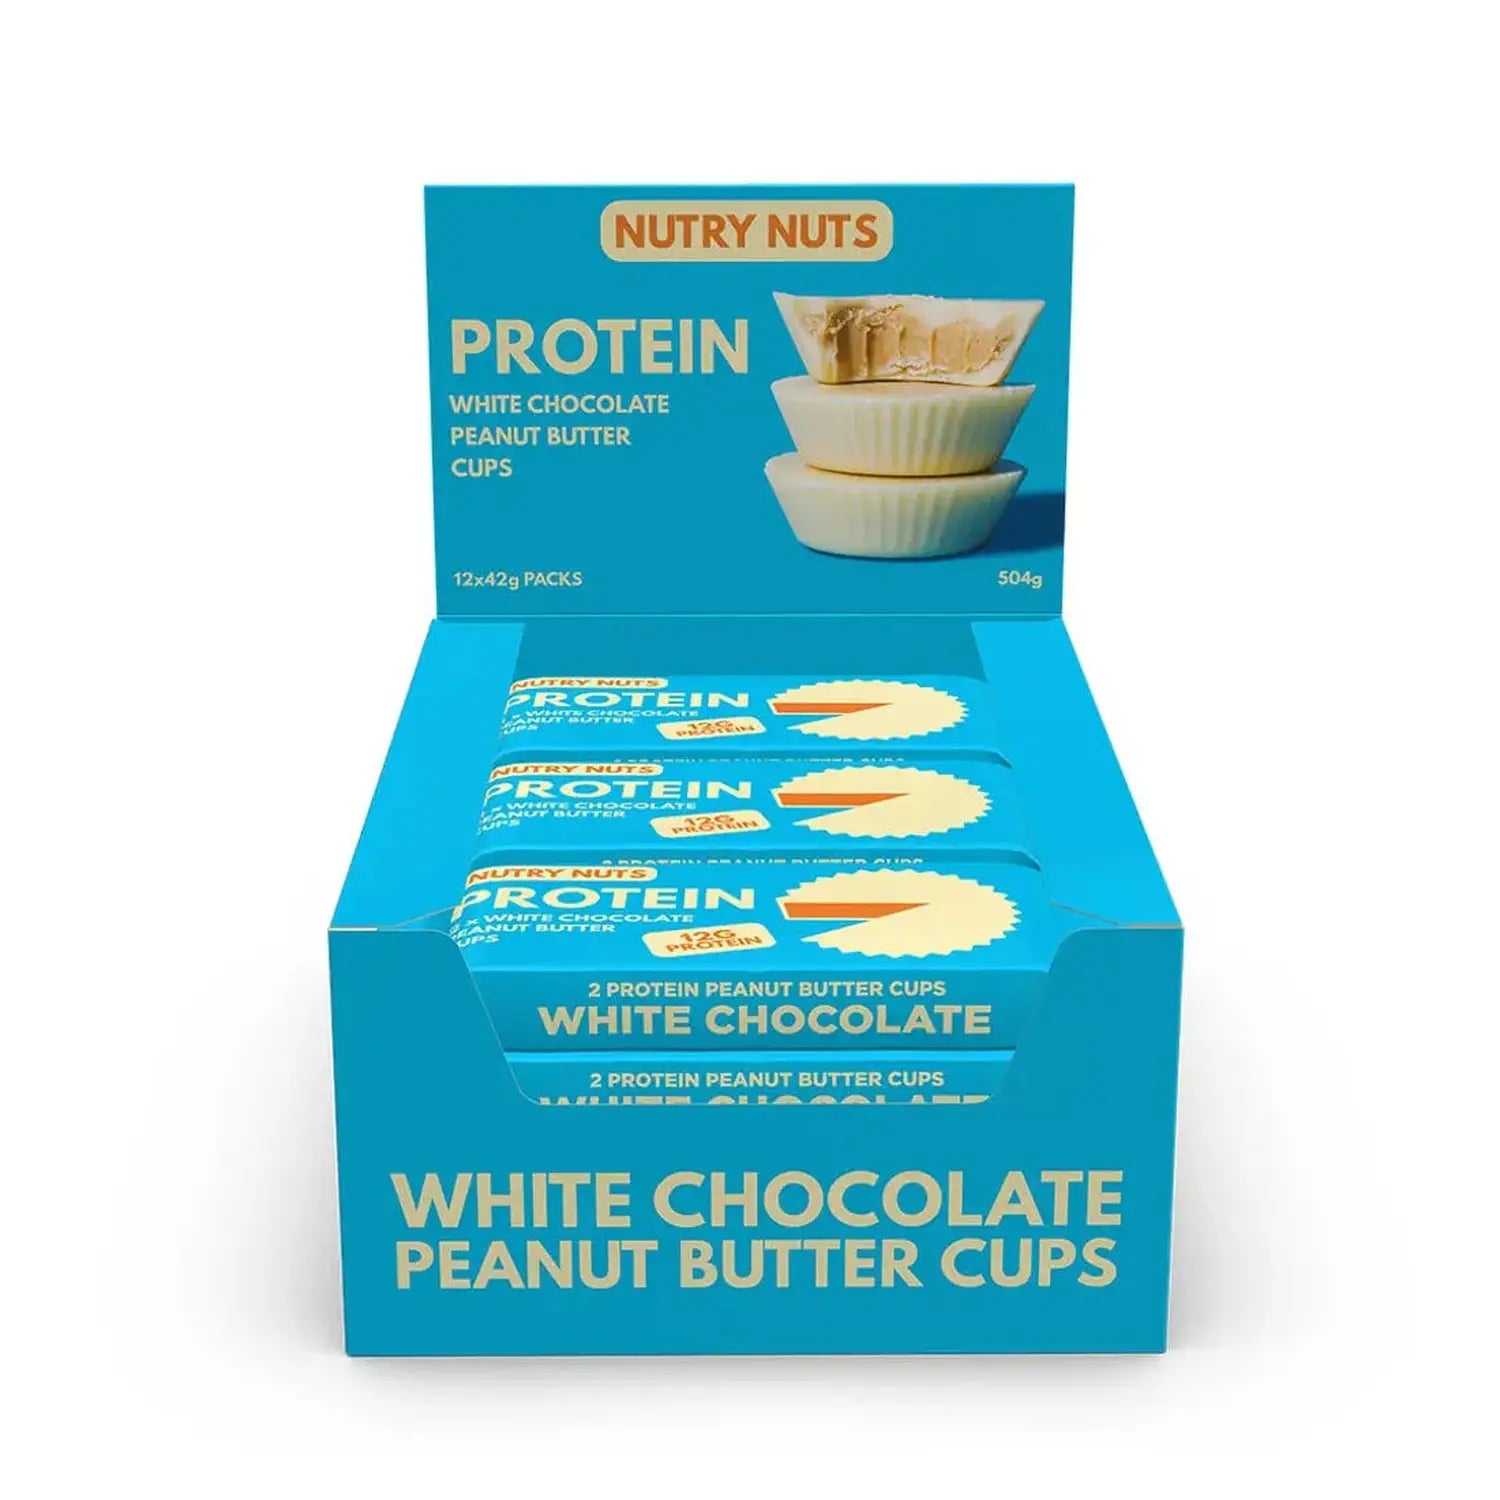 Nutry Nuts Nutry Nuts - Protein Peanut Butter Cups 12 x 42 g White Chocolate kaufen bei HighPowered.ch